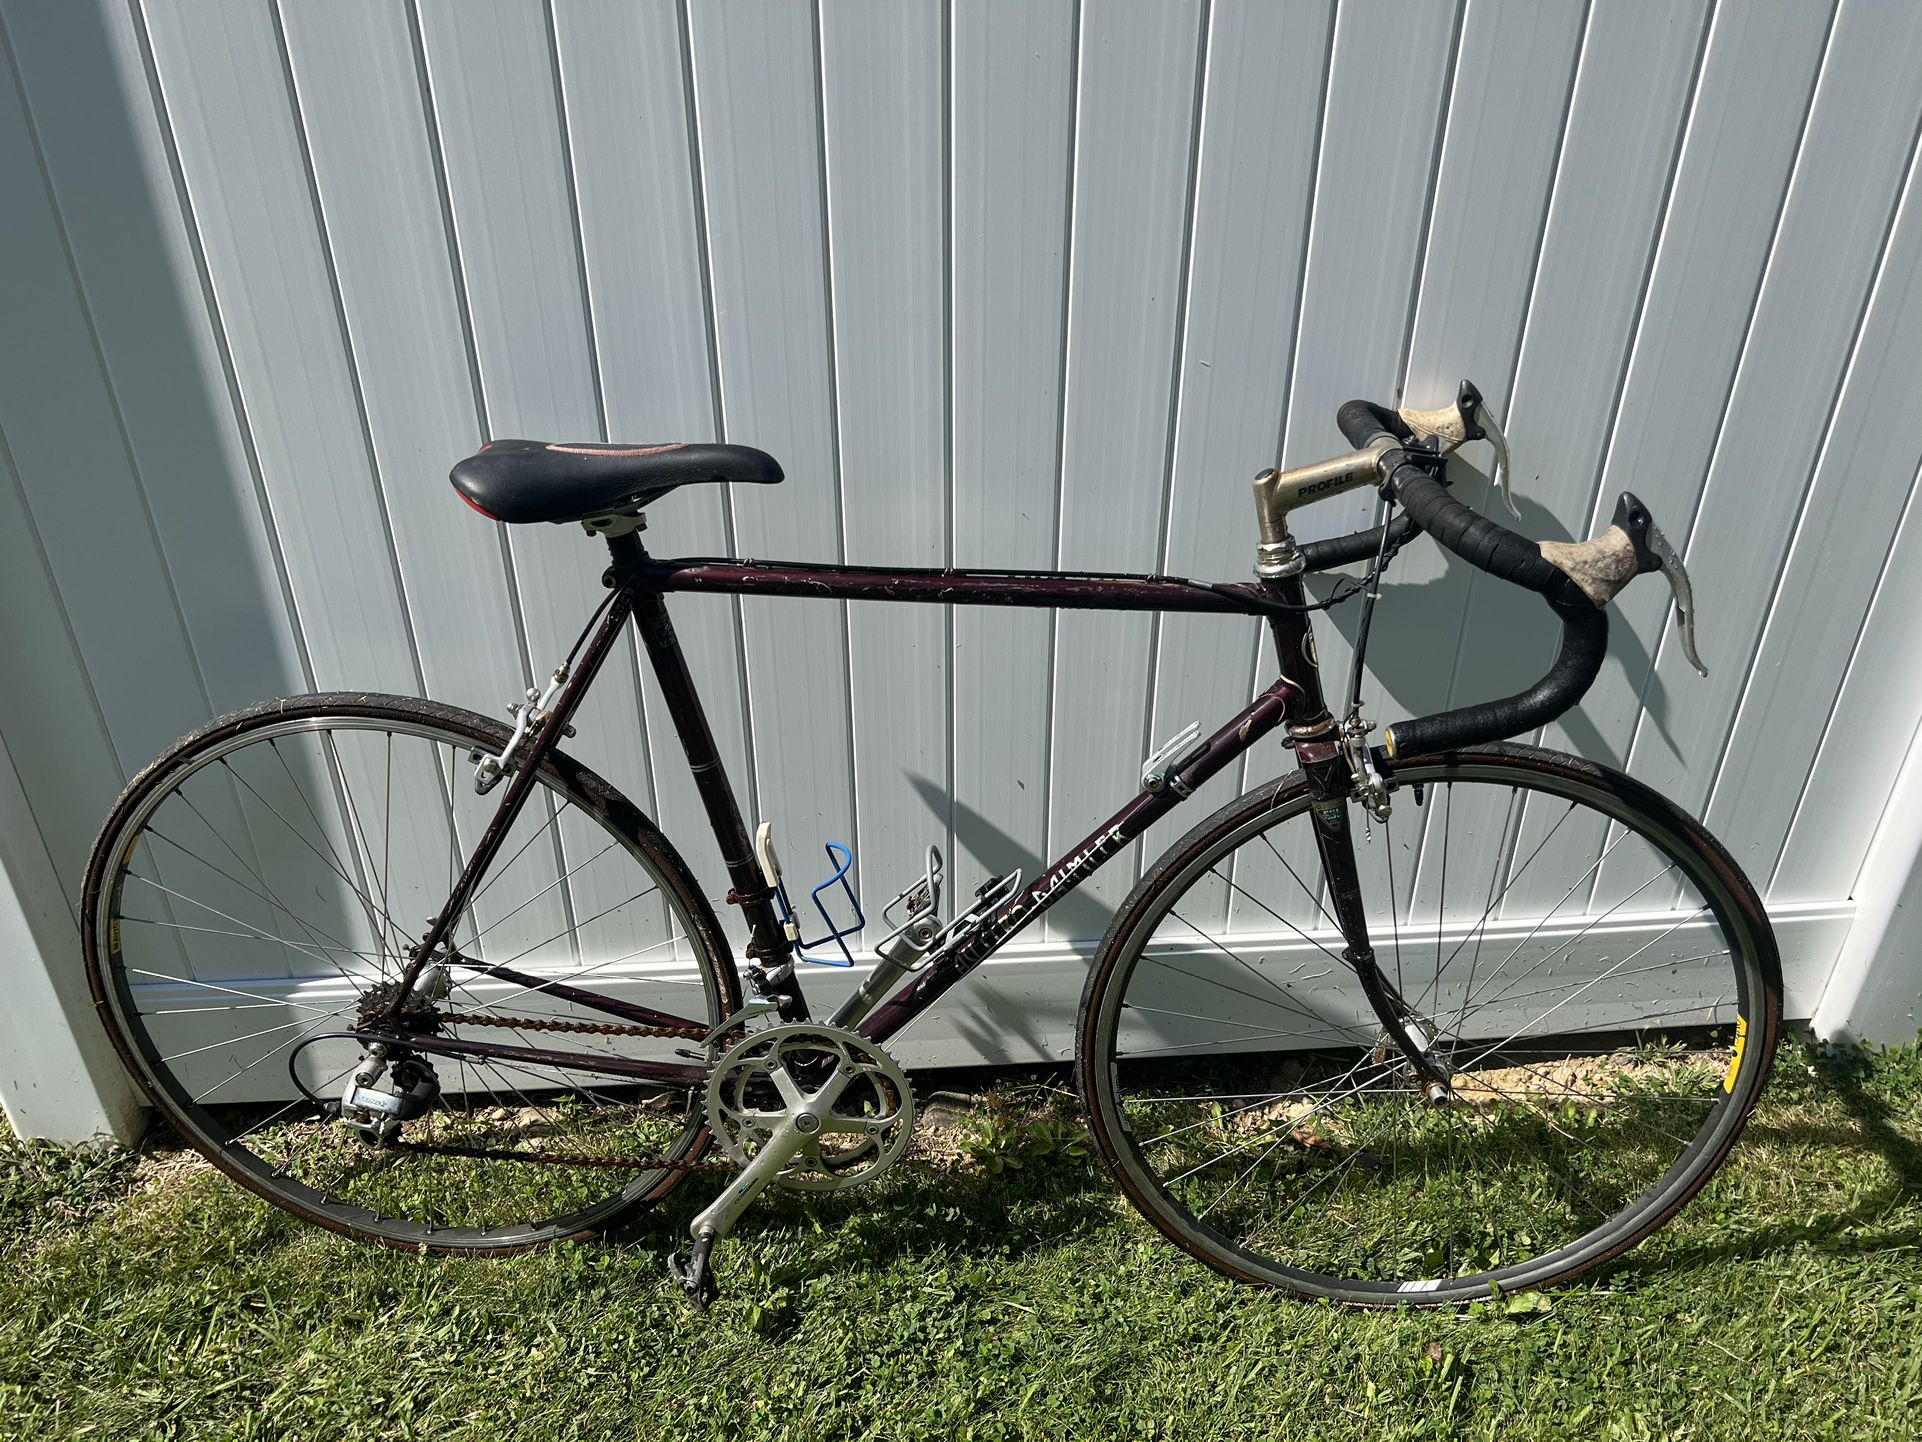 Austro Daimler Puch Vintage Bicycle